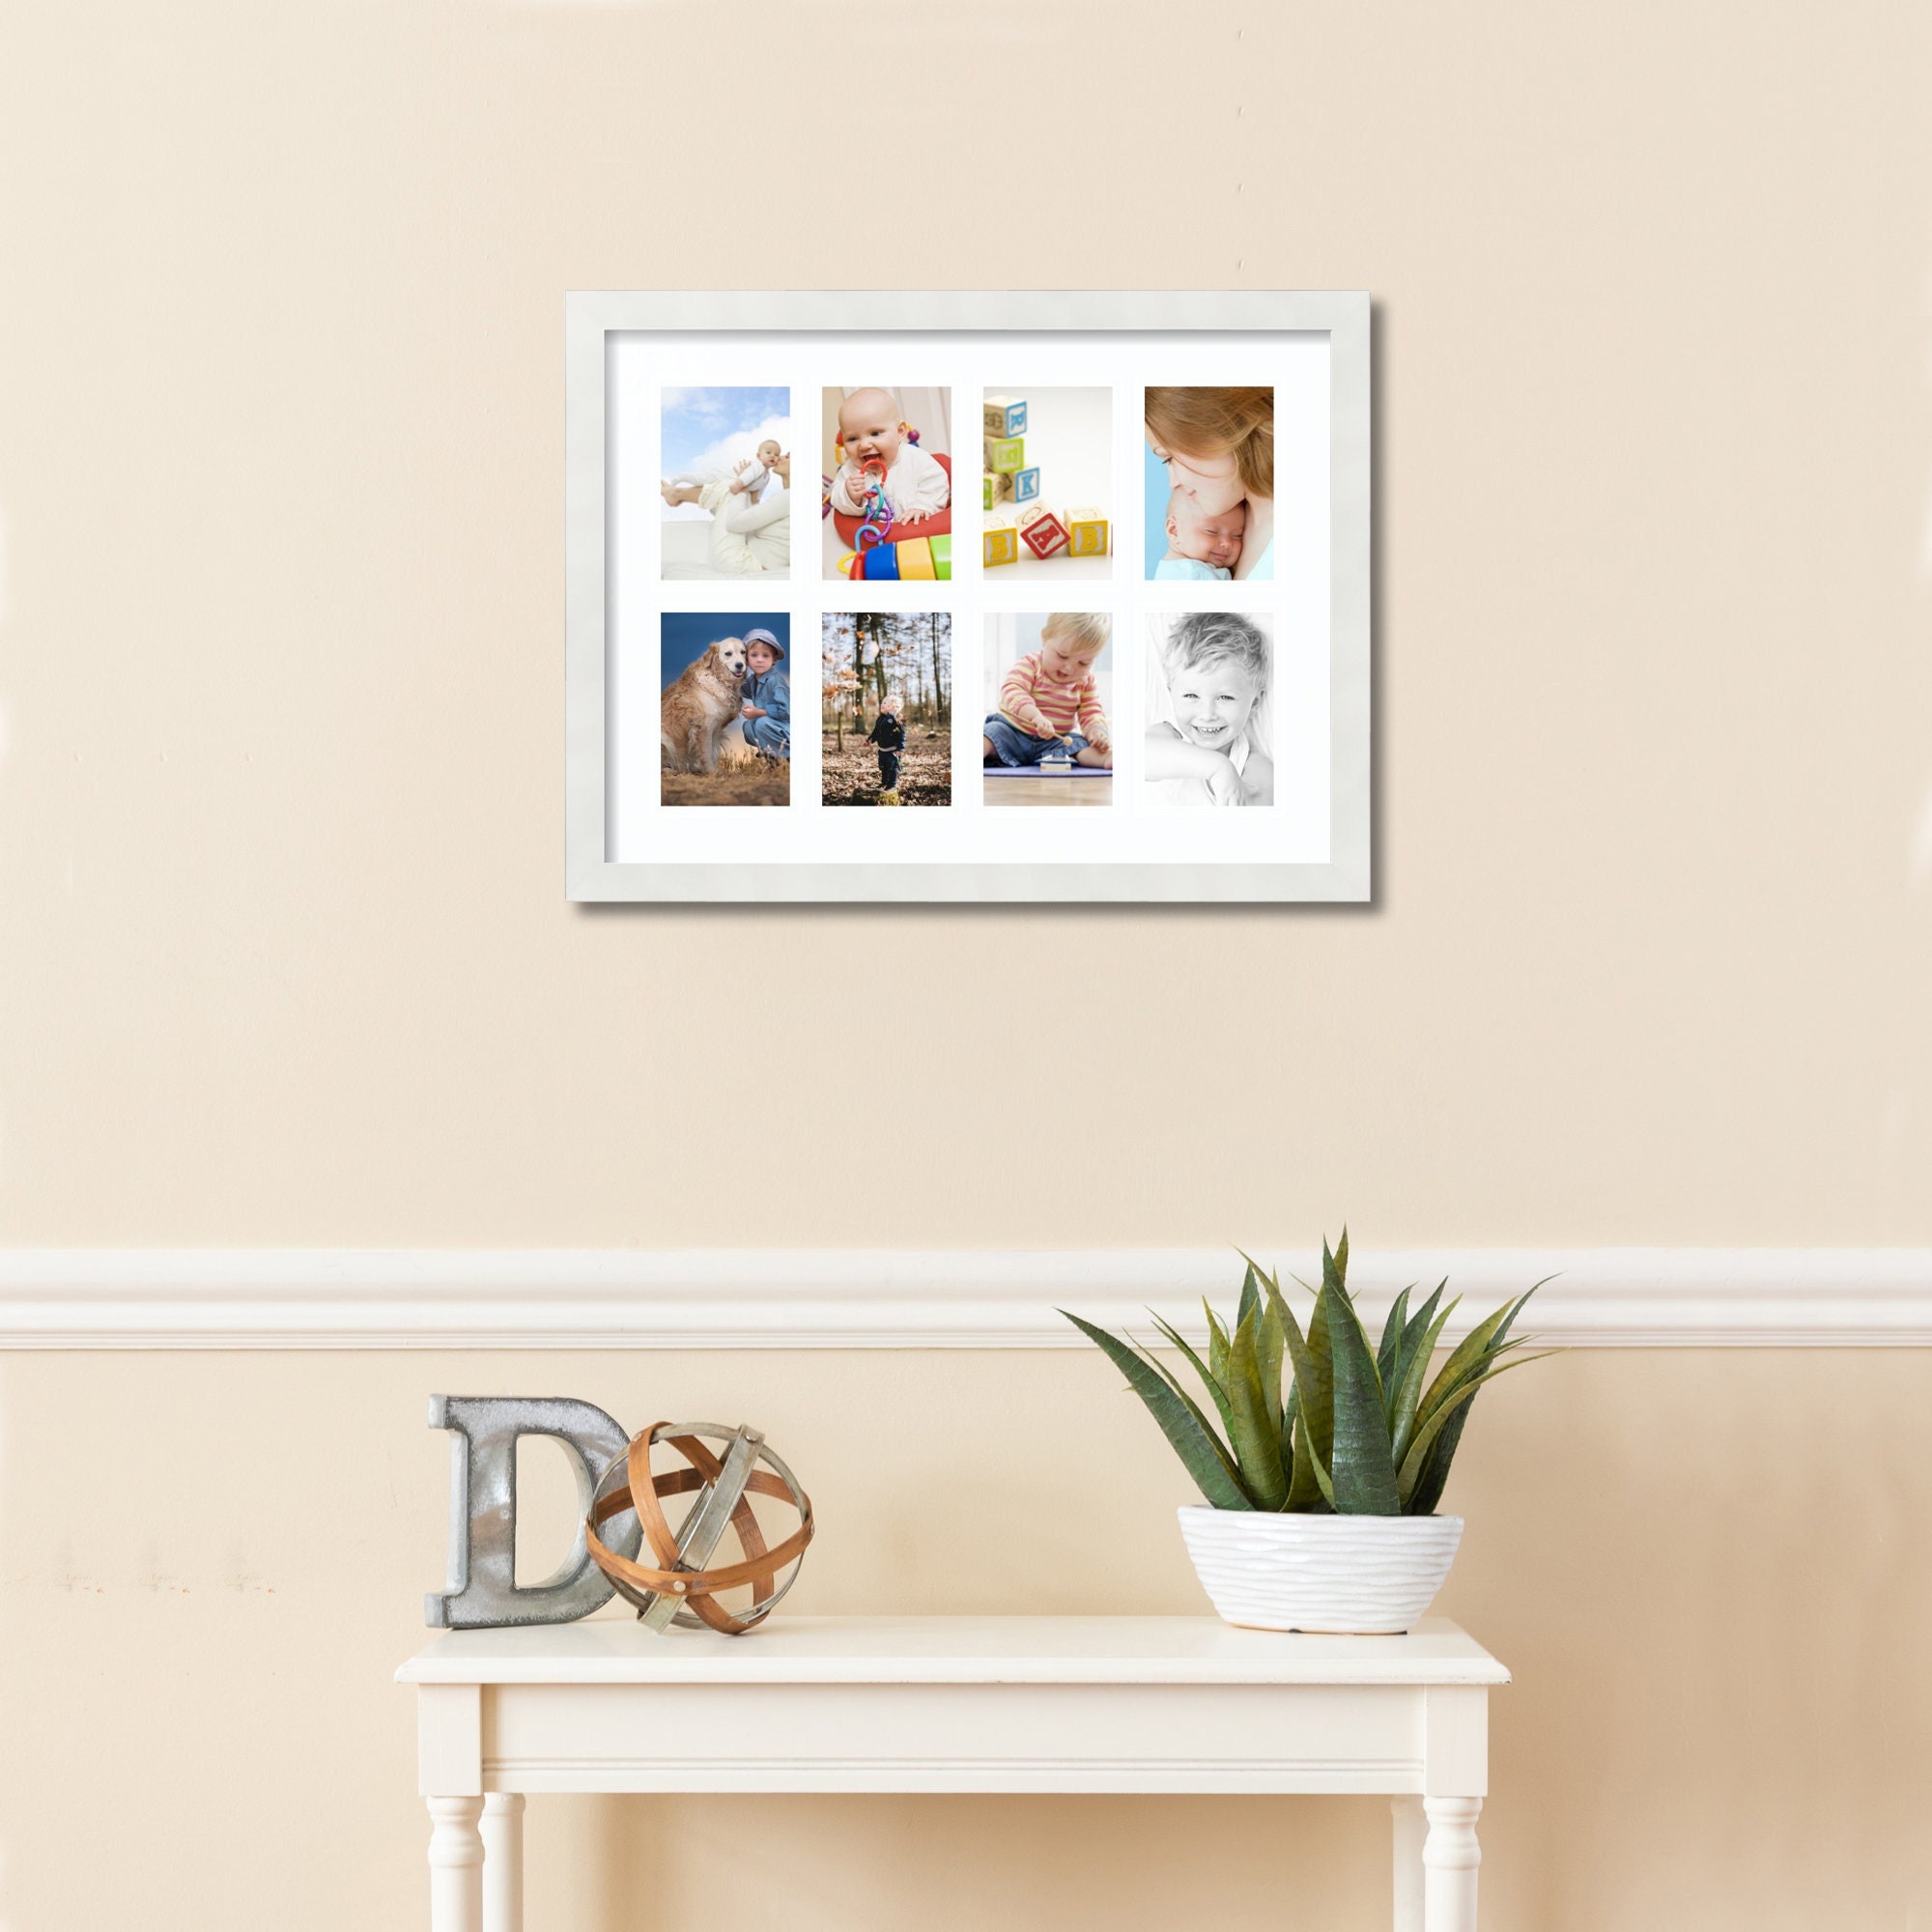 9x12 Picture Frame Mat Windows Fit 2 4x6 Photos in Peewee Style